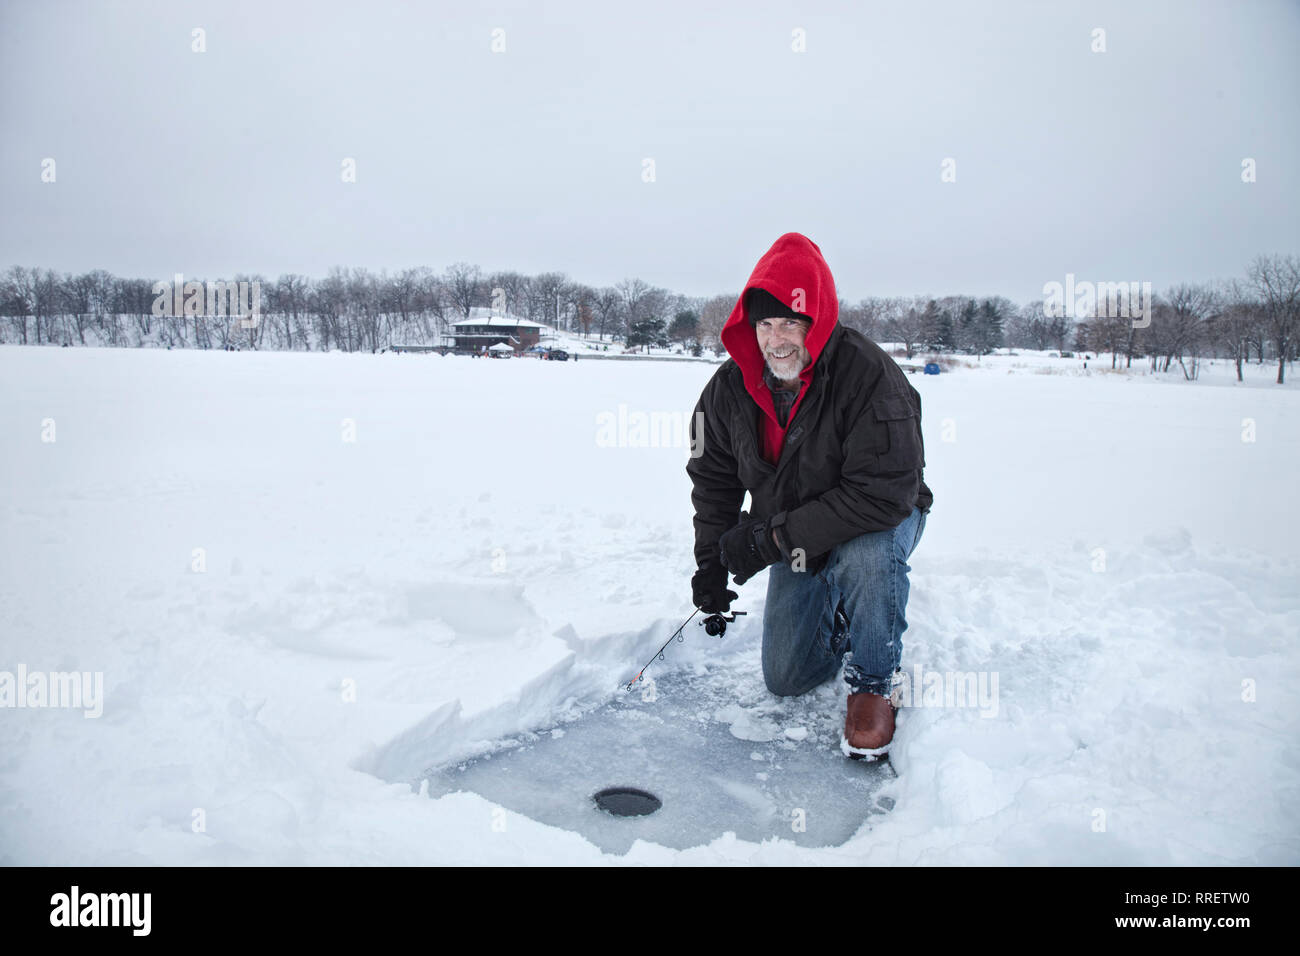 A smiling middle aged man Ice fishing on a snowy Lake dans le Minnesota pendant l'hiver Banque D'Images